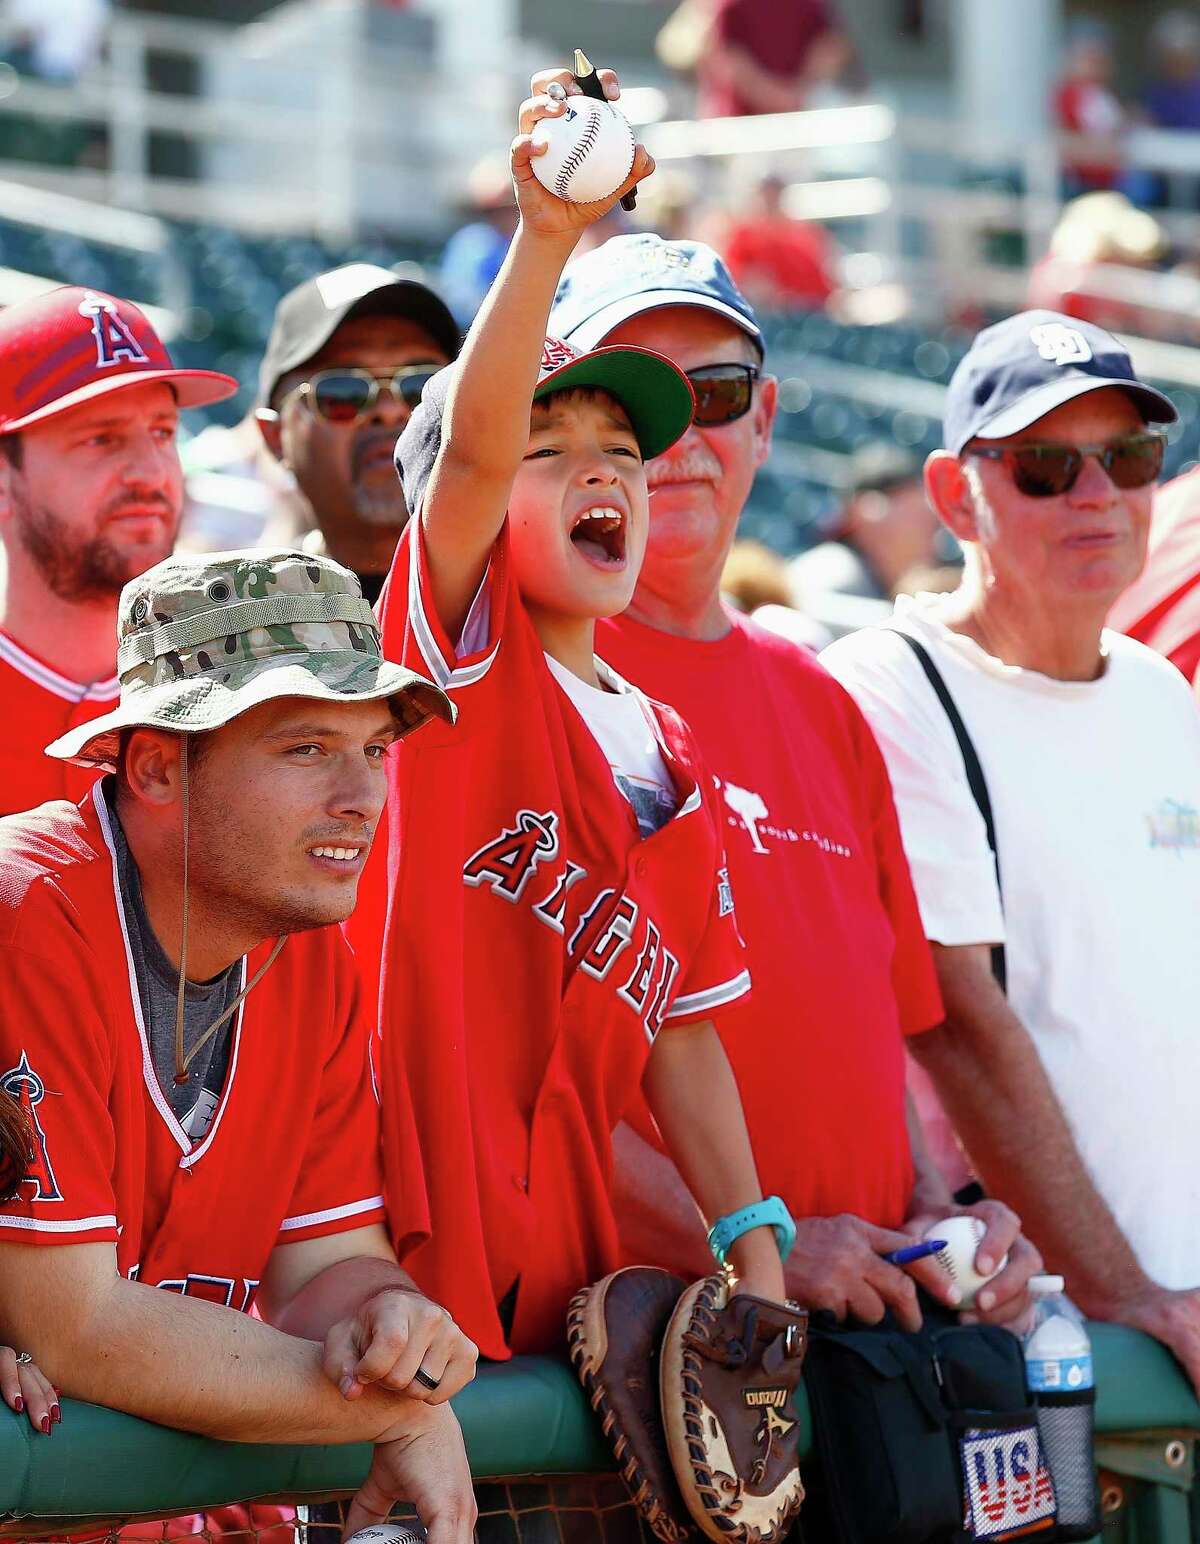 FILE - In this March 8, 2017, file photo, a Los Angeles Angels fan shouts for Mike Trout to sign his baseball, which he did, prior to a spring training baseball game against the Cincinnati Reds, in Goodyear, Ariz. Bryce Harper, Mike Trout and Aaron Judge have become the face of baseball as a gleaming, modernist ballpark and a city known for its Latino culture host the All-Star Game for the first time. (AP Photo/Ross D. Franklin, File)